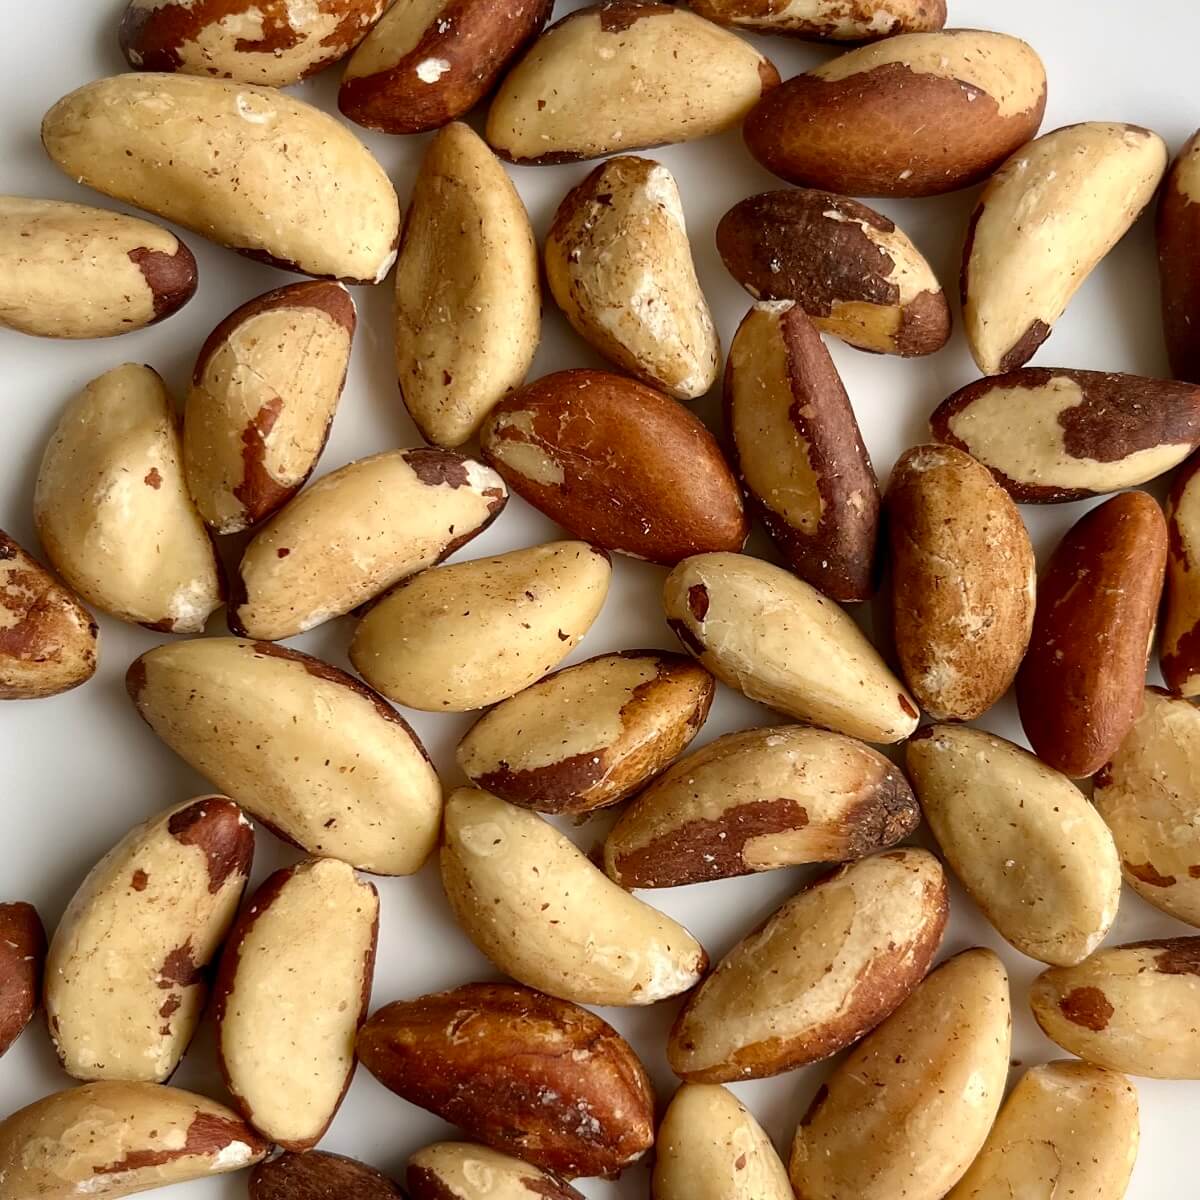 Selenium-rich brazil nuts on a white plate.